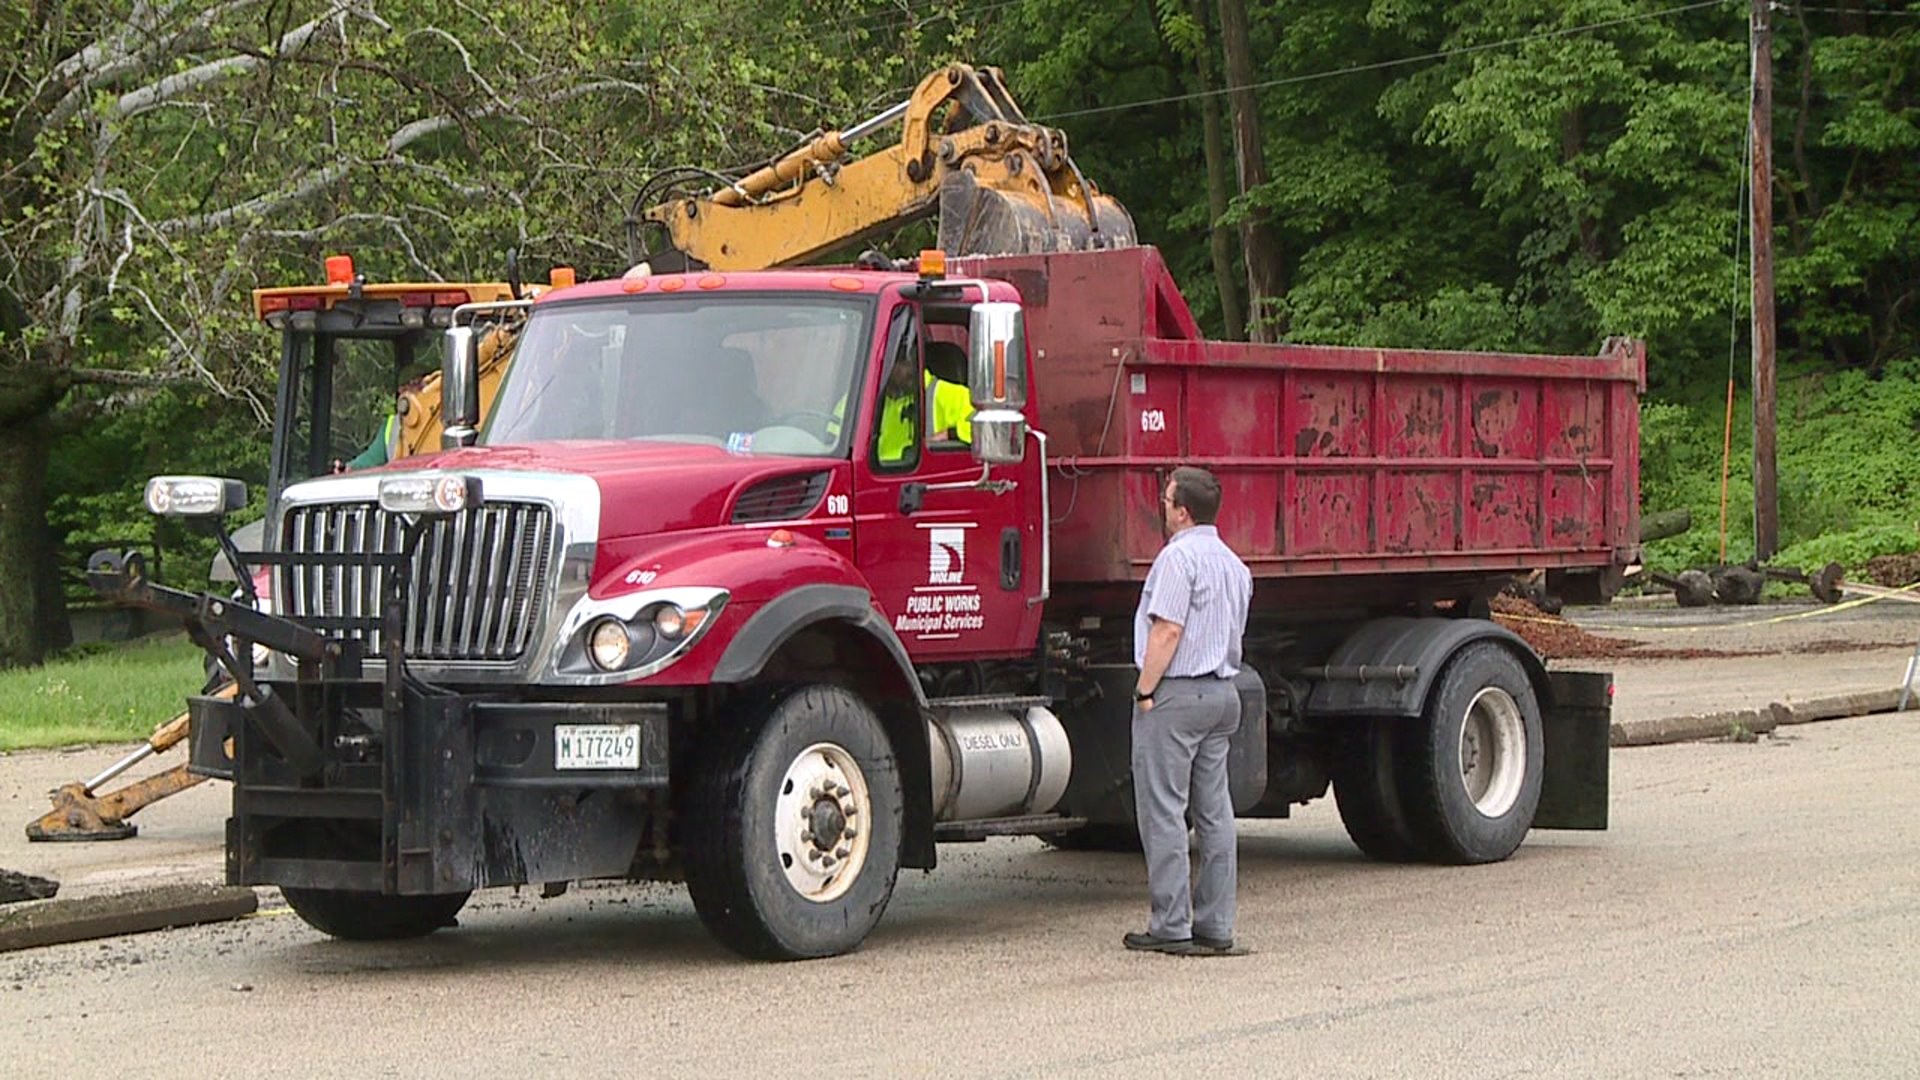 Moline Public Works crews try to keep up with extra work caused by flooding